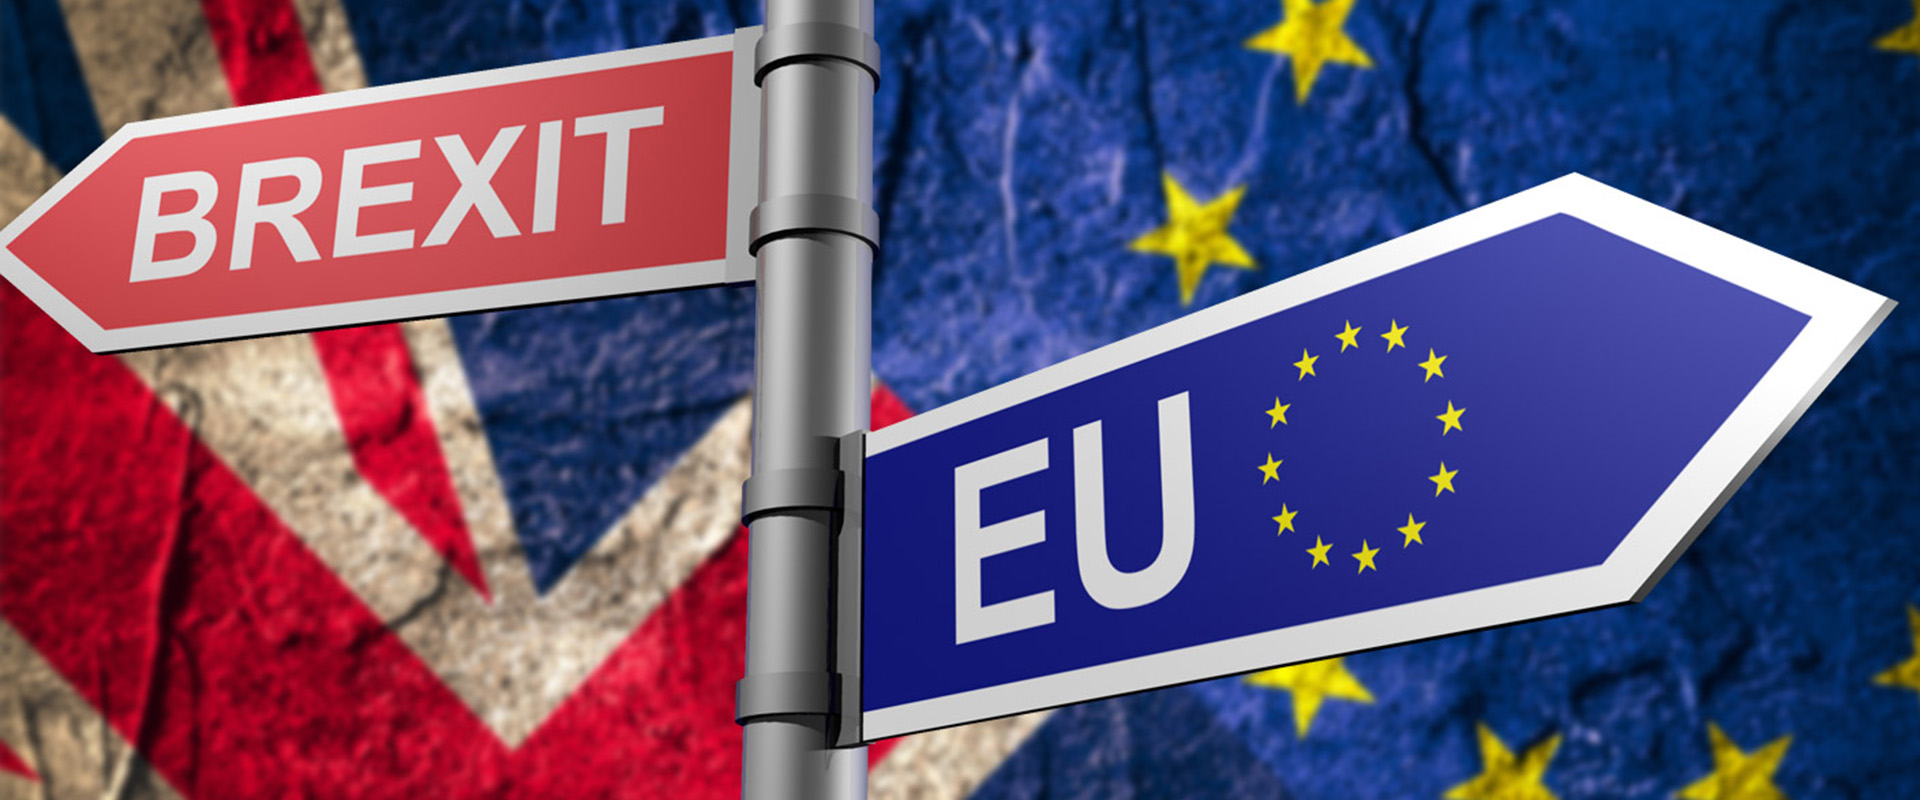 Signpost with Red Brexit sign and Blue EU sign